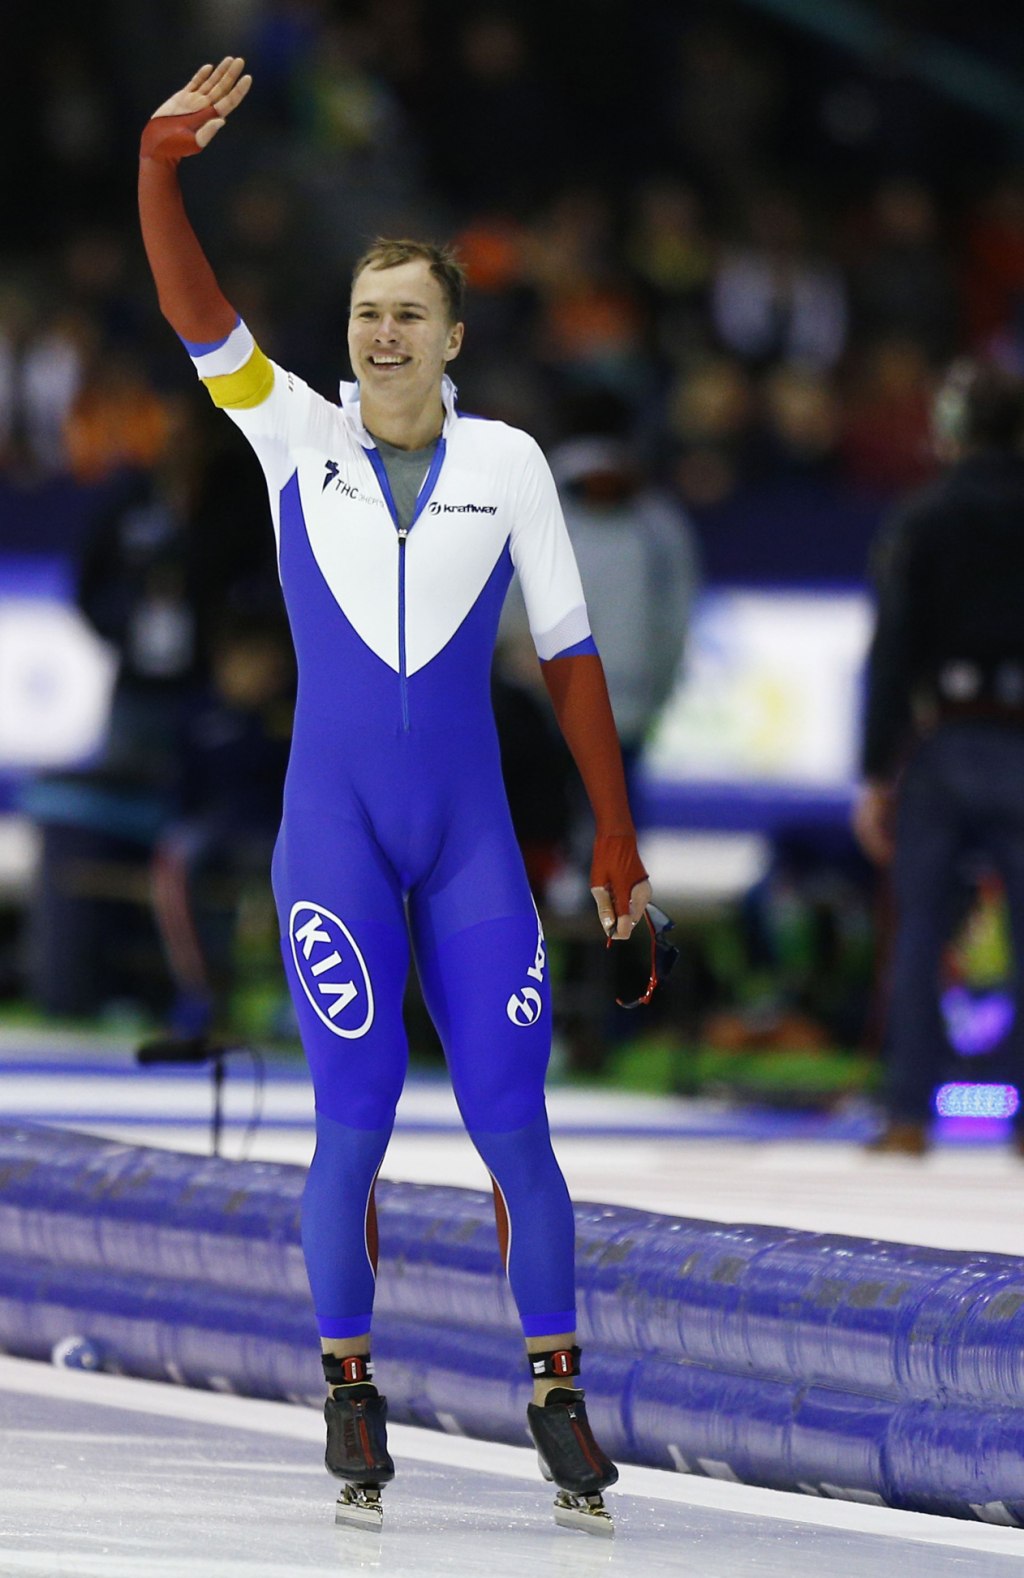 Pavel Kulizhnikov of Russia waves to the crowd after winning фото (photo)